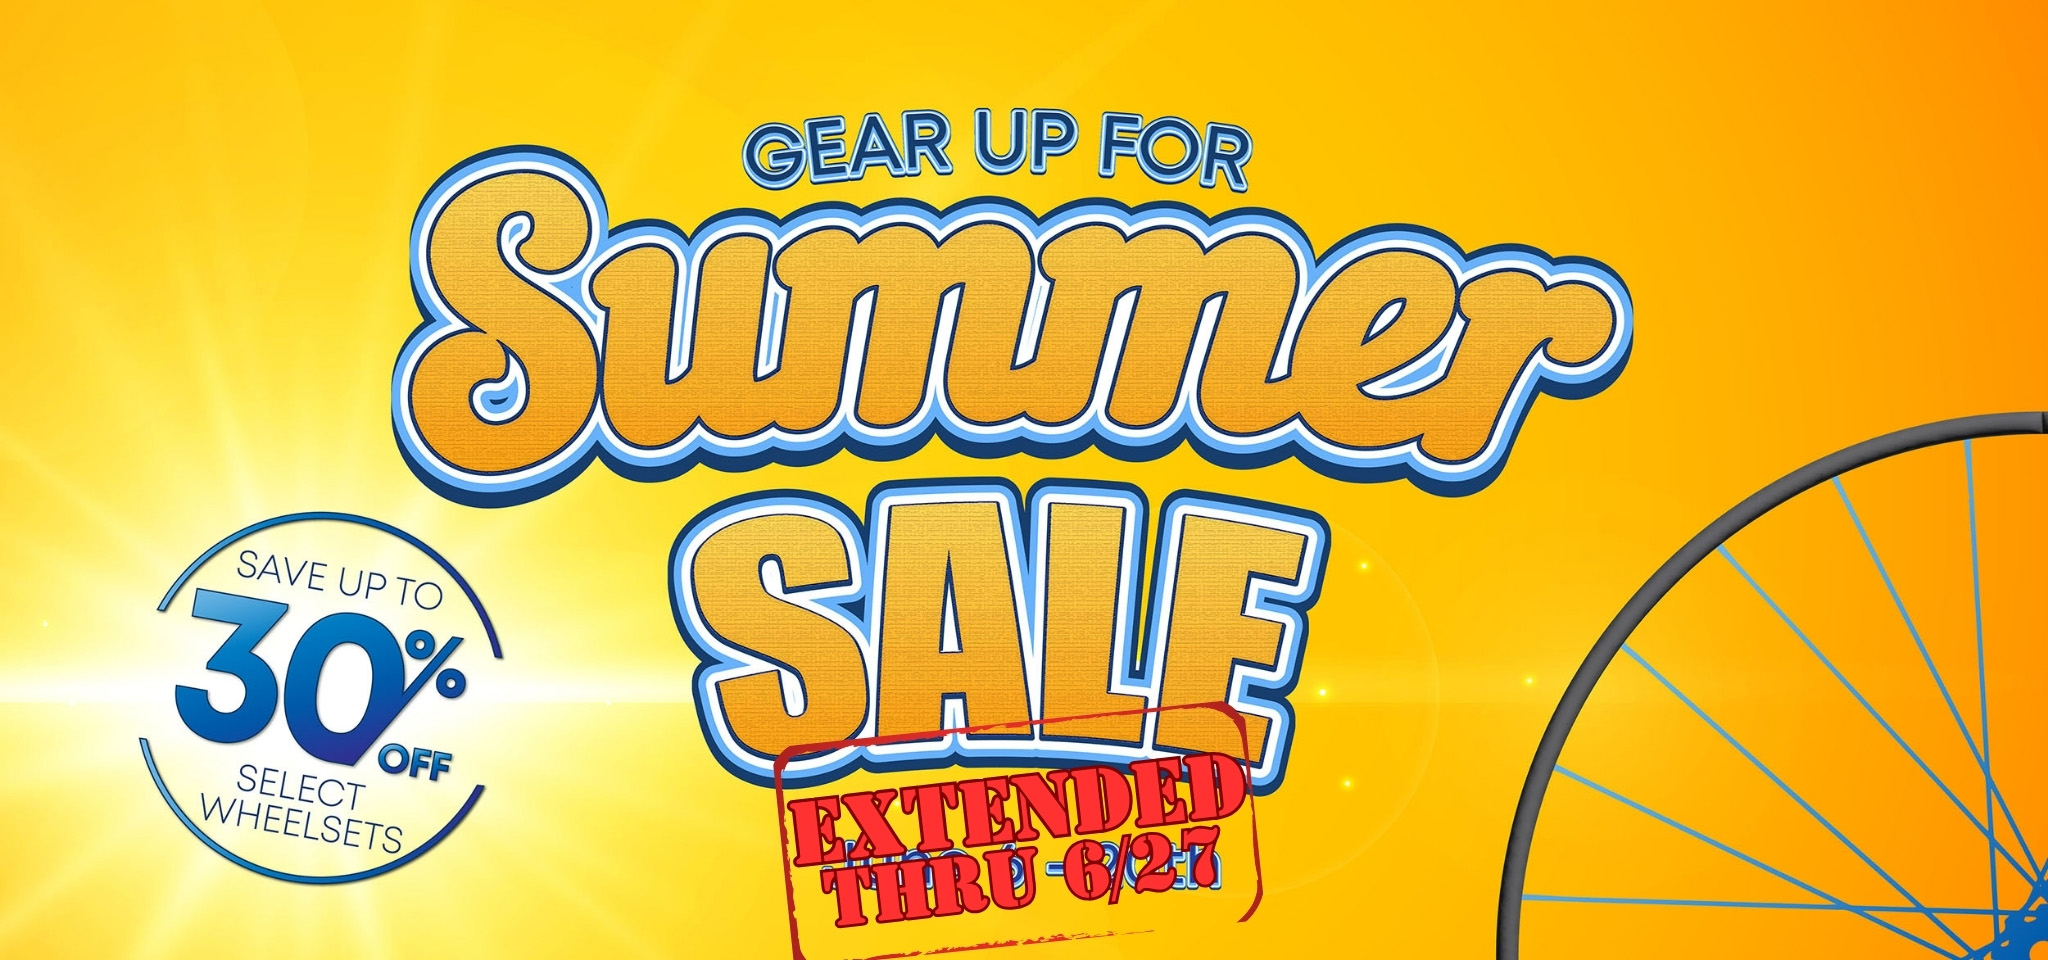 Gear Up For Summer Sale June 6-27th